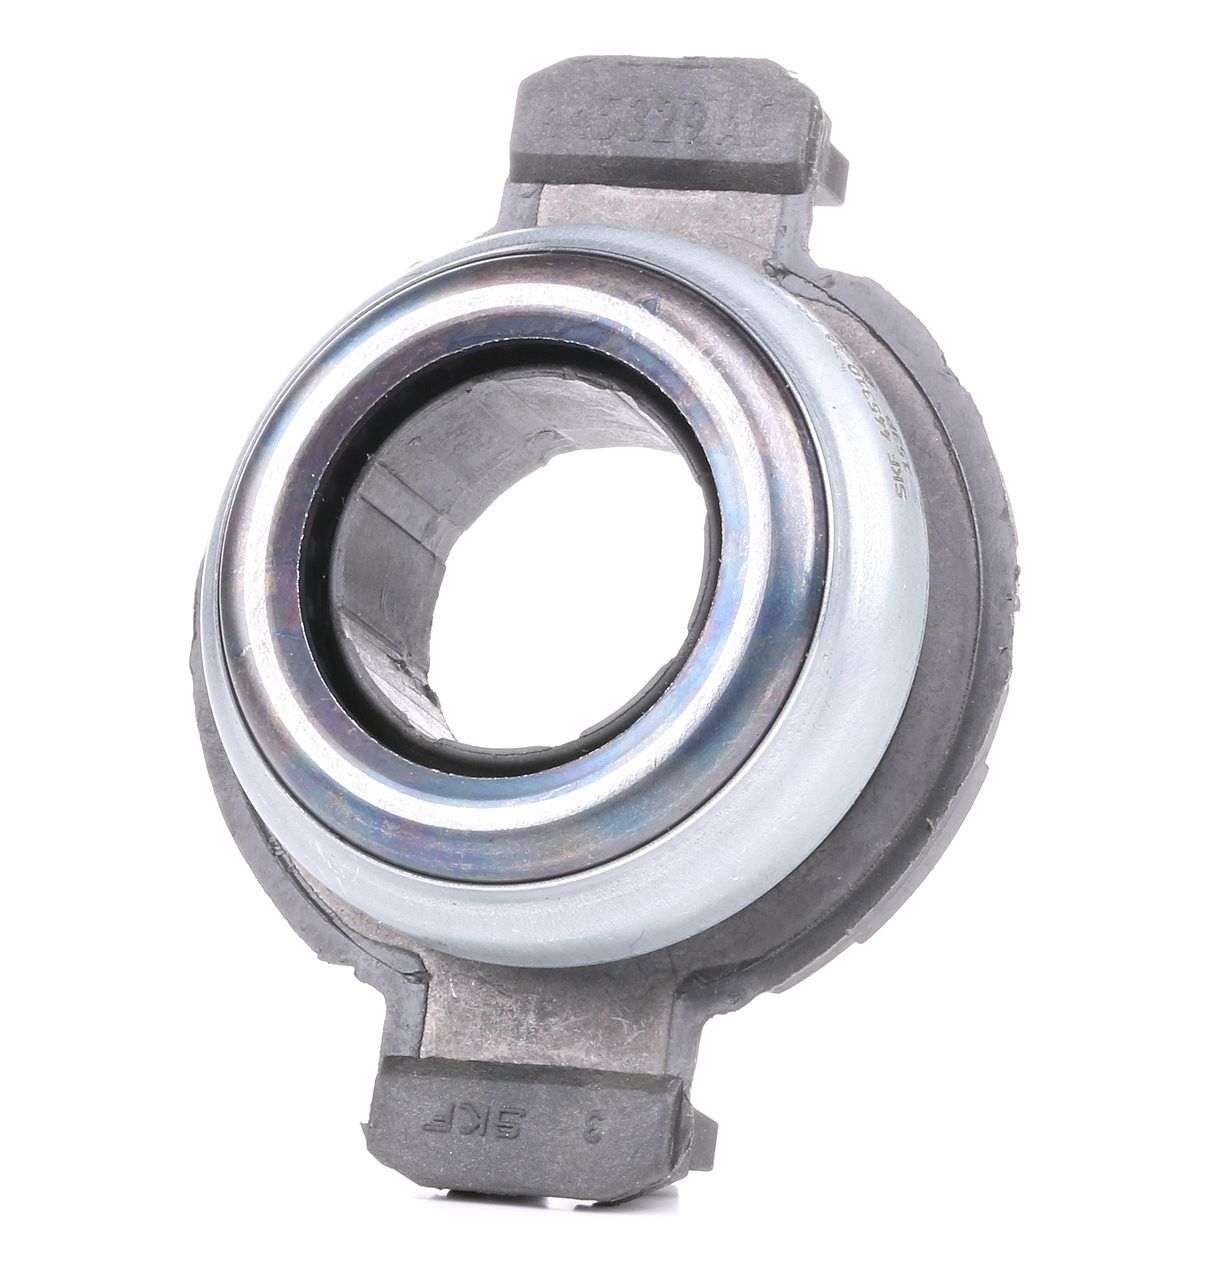 Image of SKF Clutch Release Bearing FIAT,PEUGEOT,CITROËN VKC 2516 204150,204164,C0000204160 Clutch Bearing,Release Bearing,Releaser 9614677380,9635856280